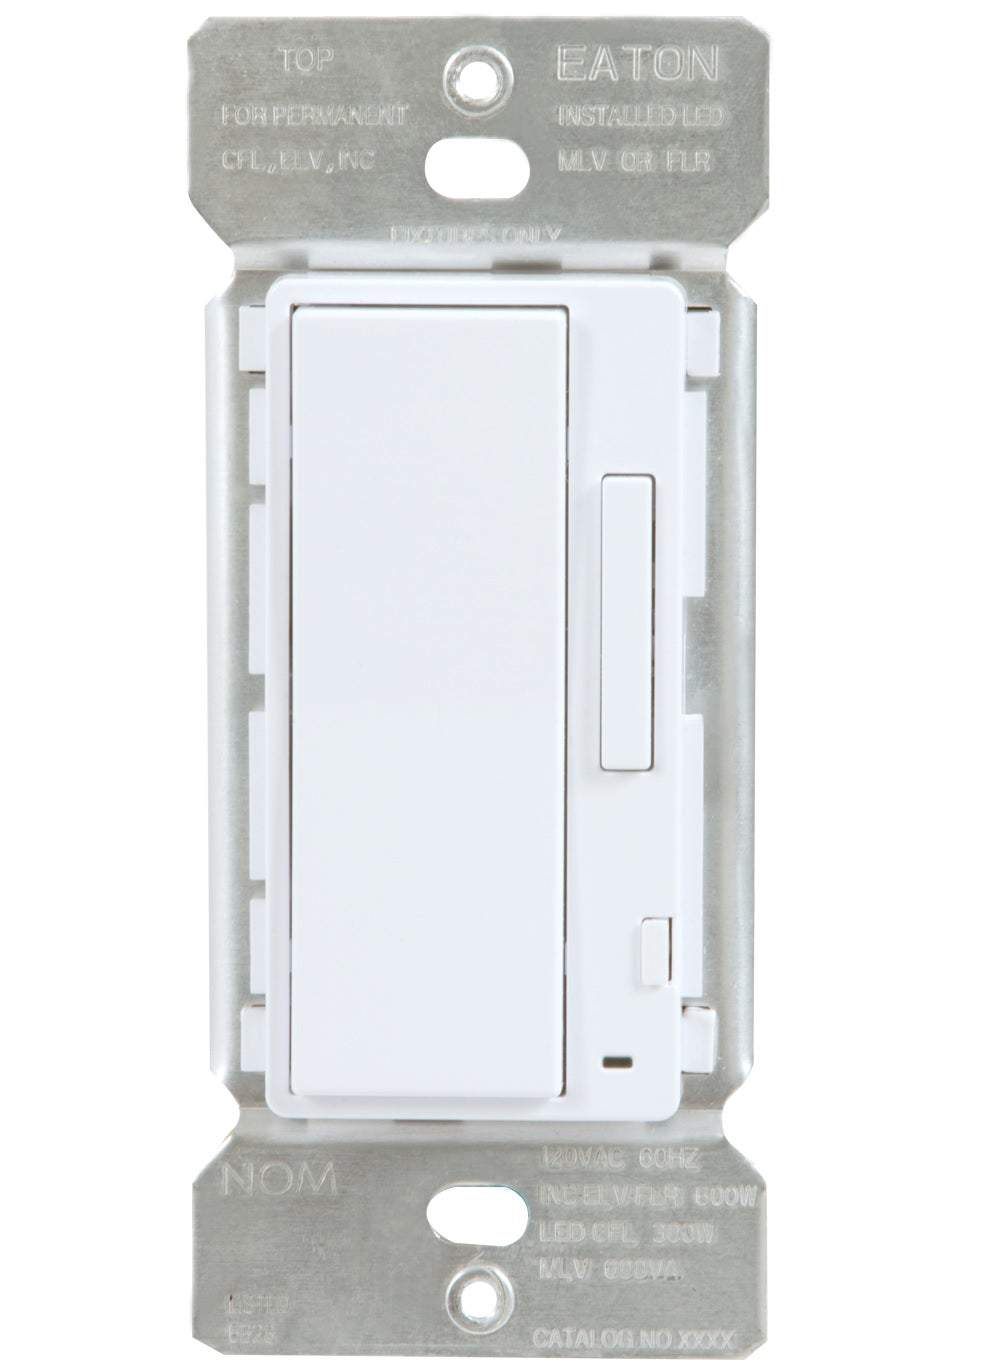 Eaton HIWAC1BLE40AWH Halo Home In-wall Accessory Dimmer, White